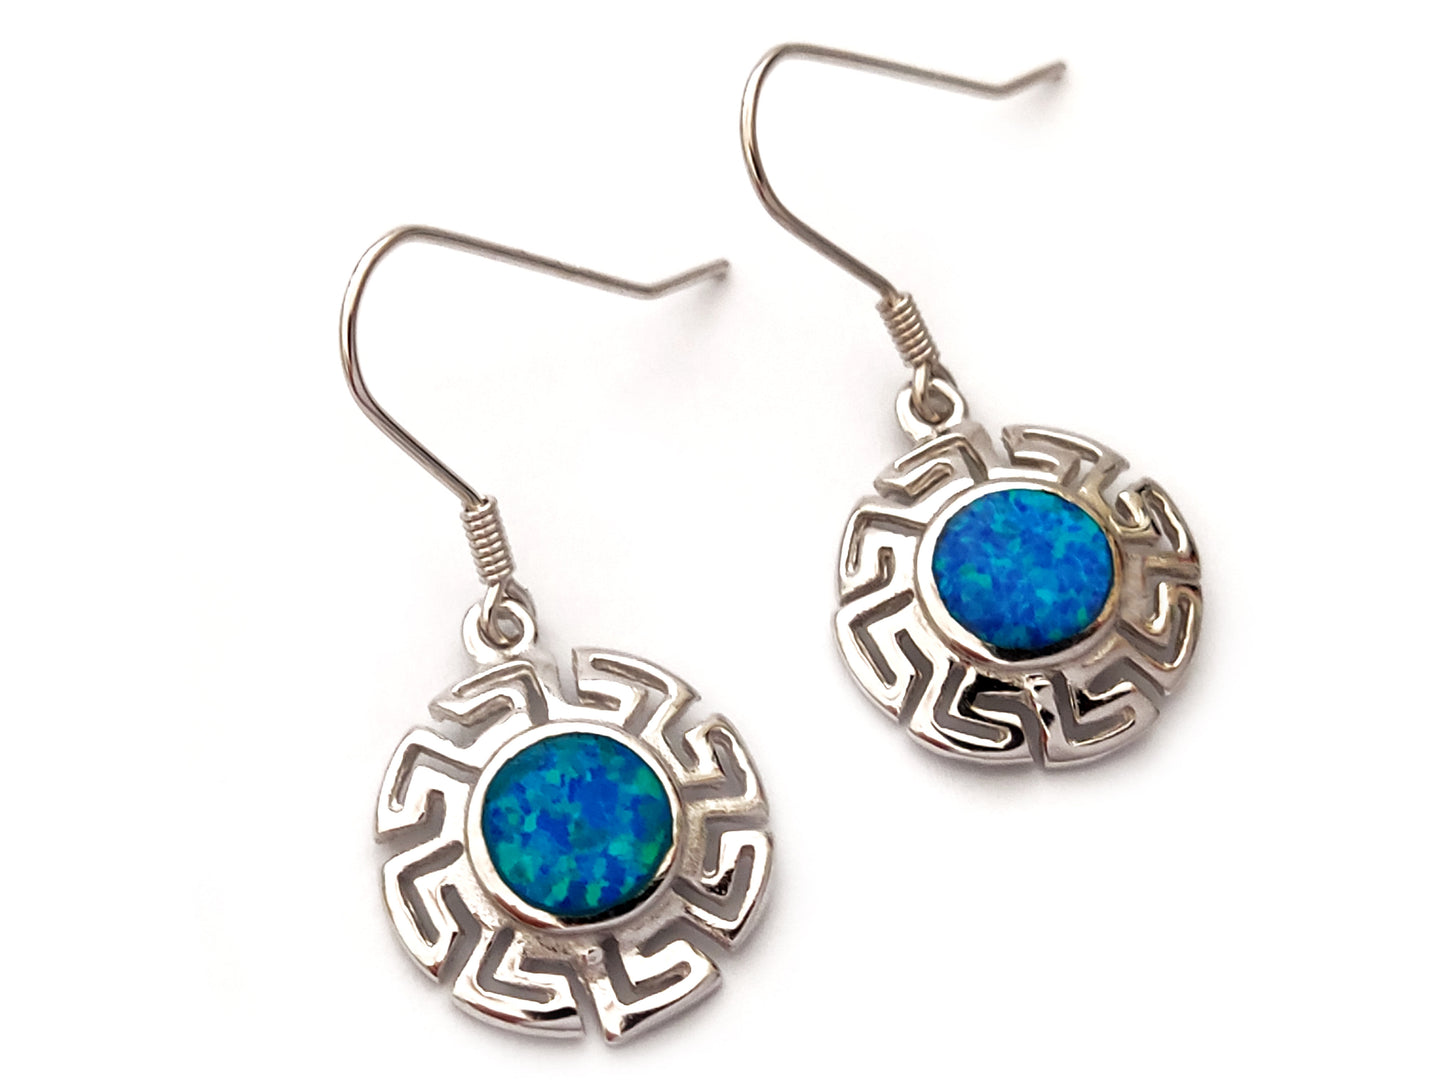 Greek silver earrings in round shape with the Greek Key and blue opal stones on white background.